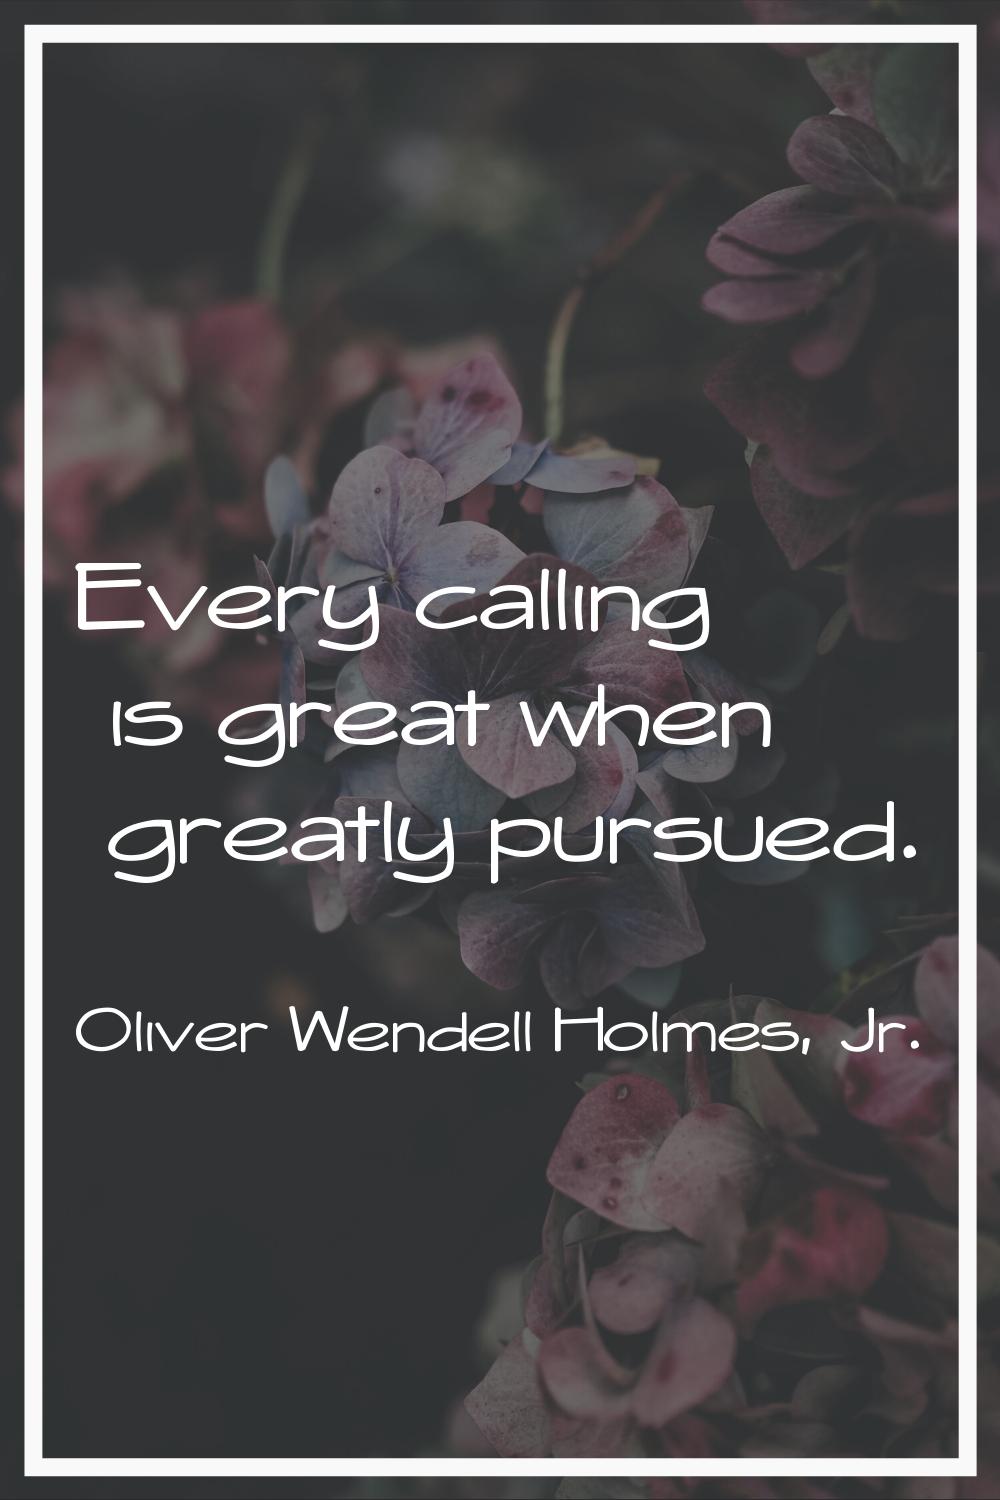 Every calling is great when greatly pursued.